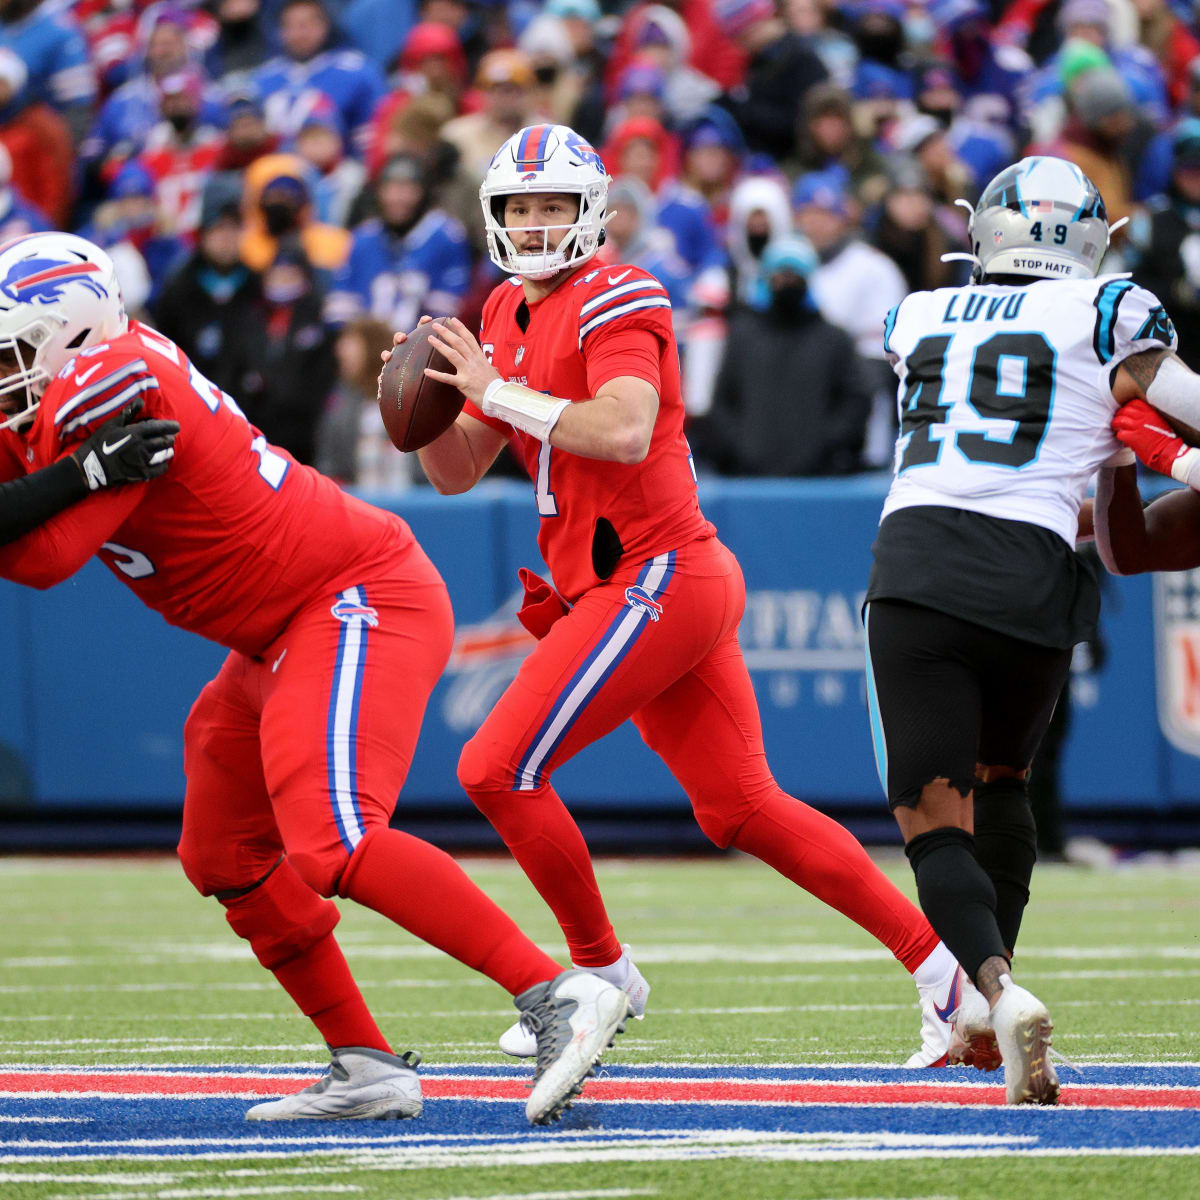 Panthers vs. Bills live stream: TV channel, how to watch